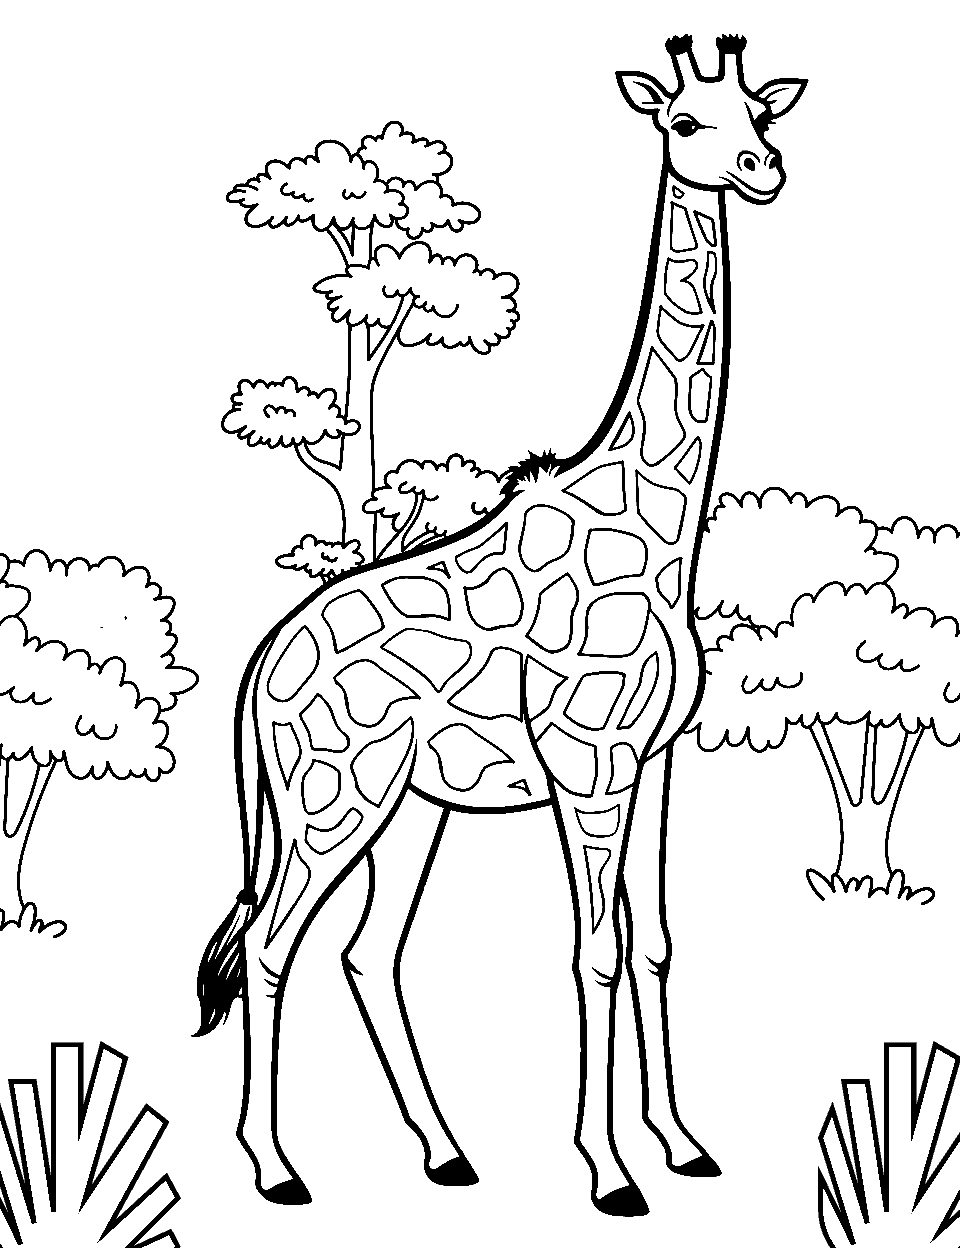 Giraffe coloring pages free printable sheets